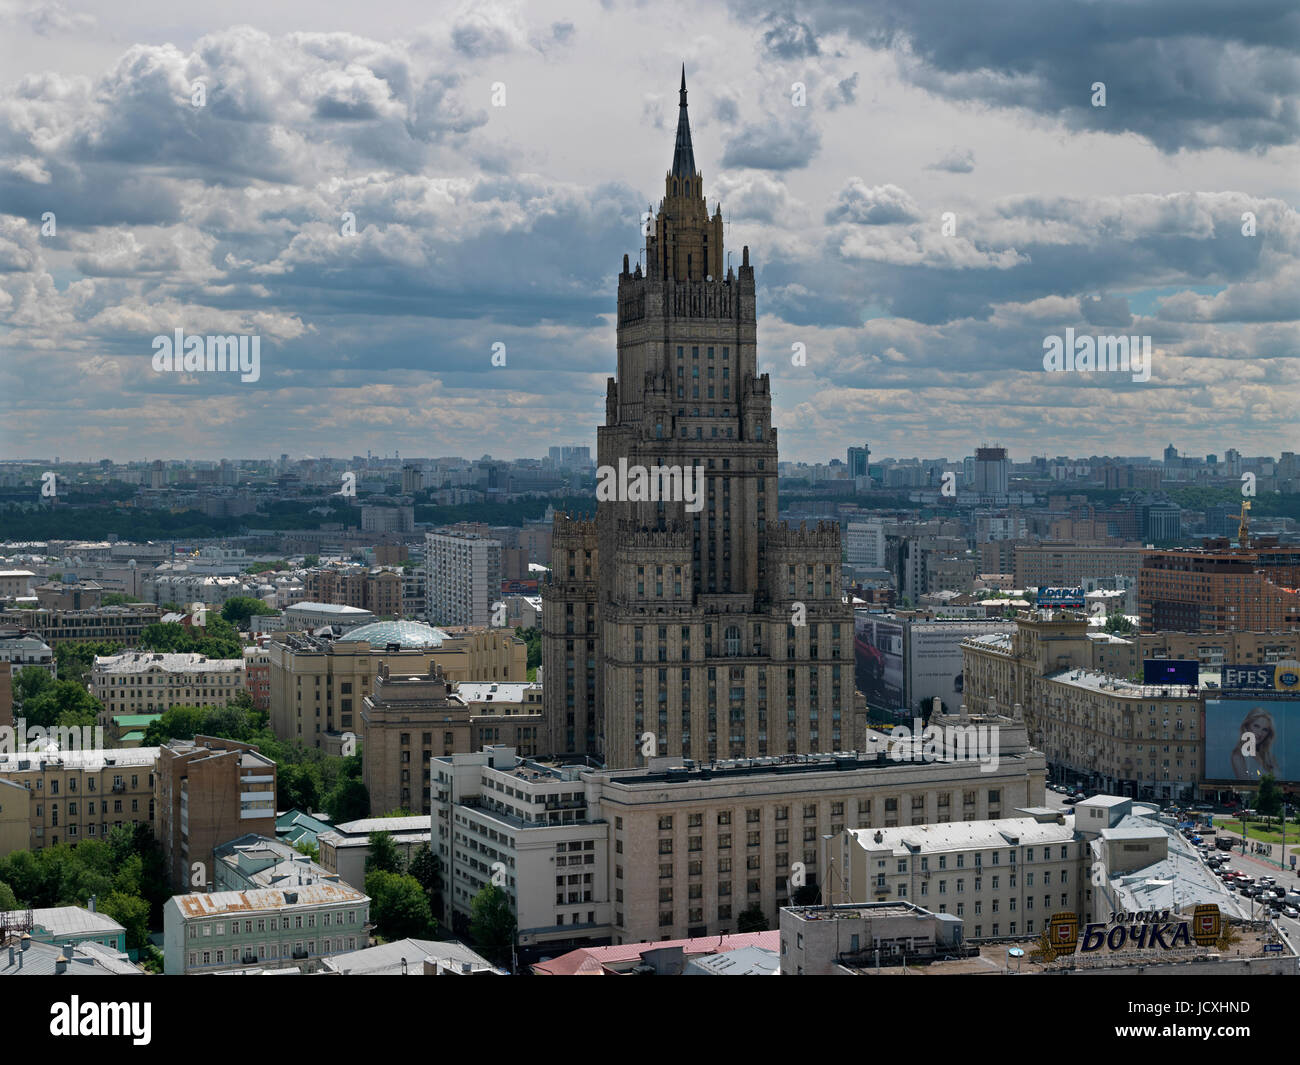 View from Lotte-Plaza onto the Stalin building, Ministry of Foreign Affairs, External Affairs, Moscow, Russia, Europe Stock Photo